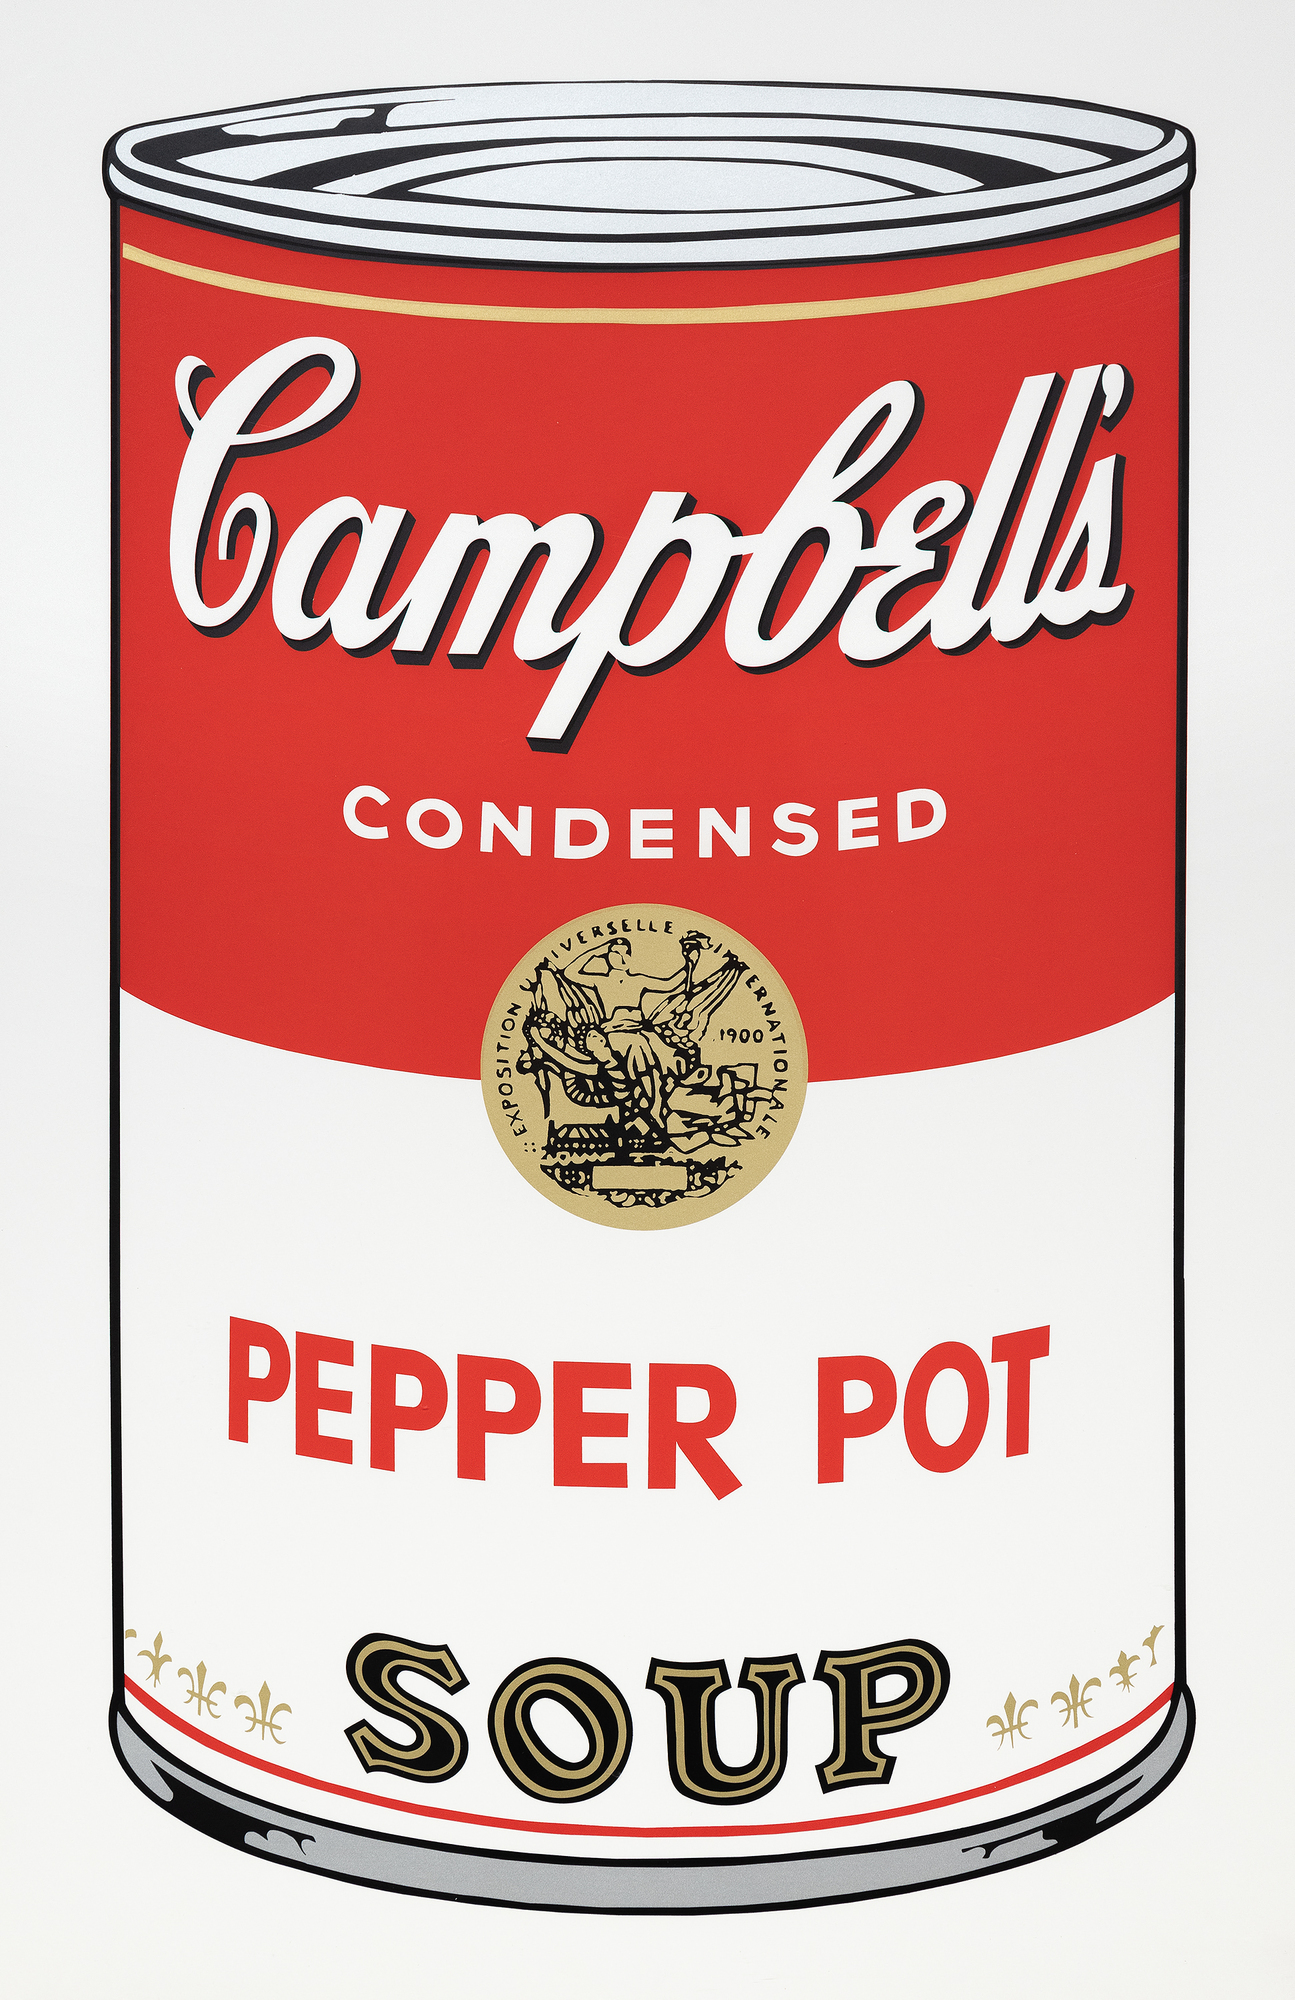 ANDY WARHOL - Pepper Pot from Campbell's Soup - screenprint in colors - 35 x 23 in.